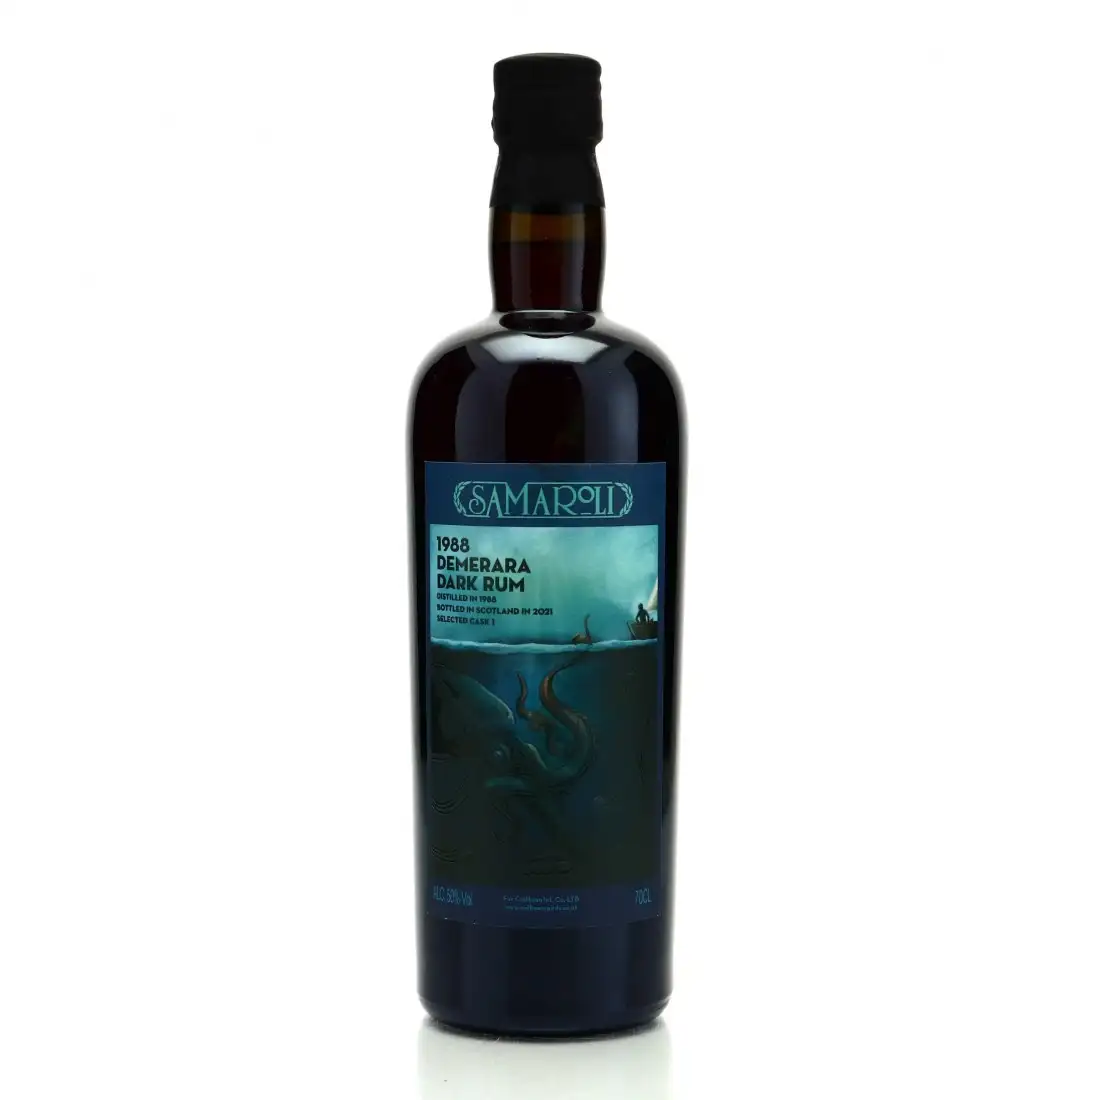 Image of the front of the bottle of the rum Demerara Dark Rum